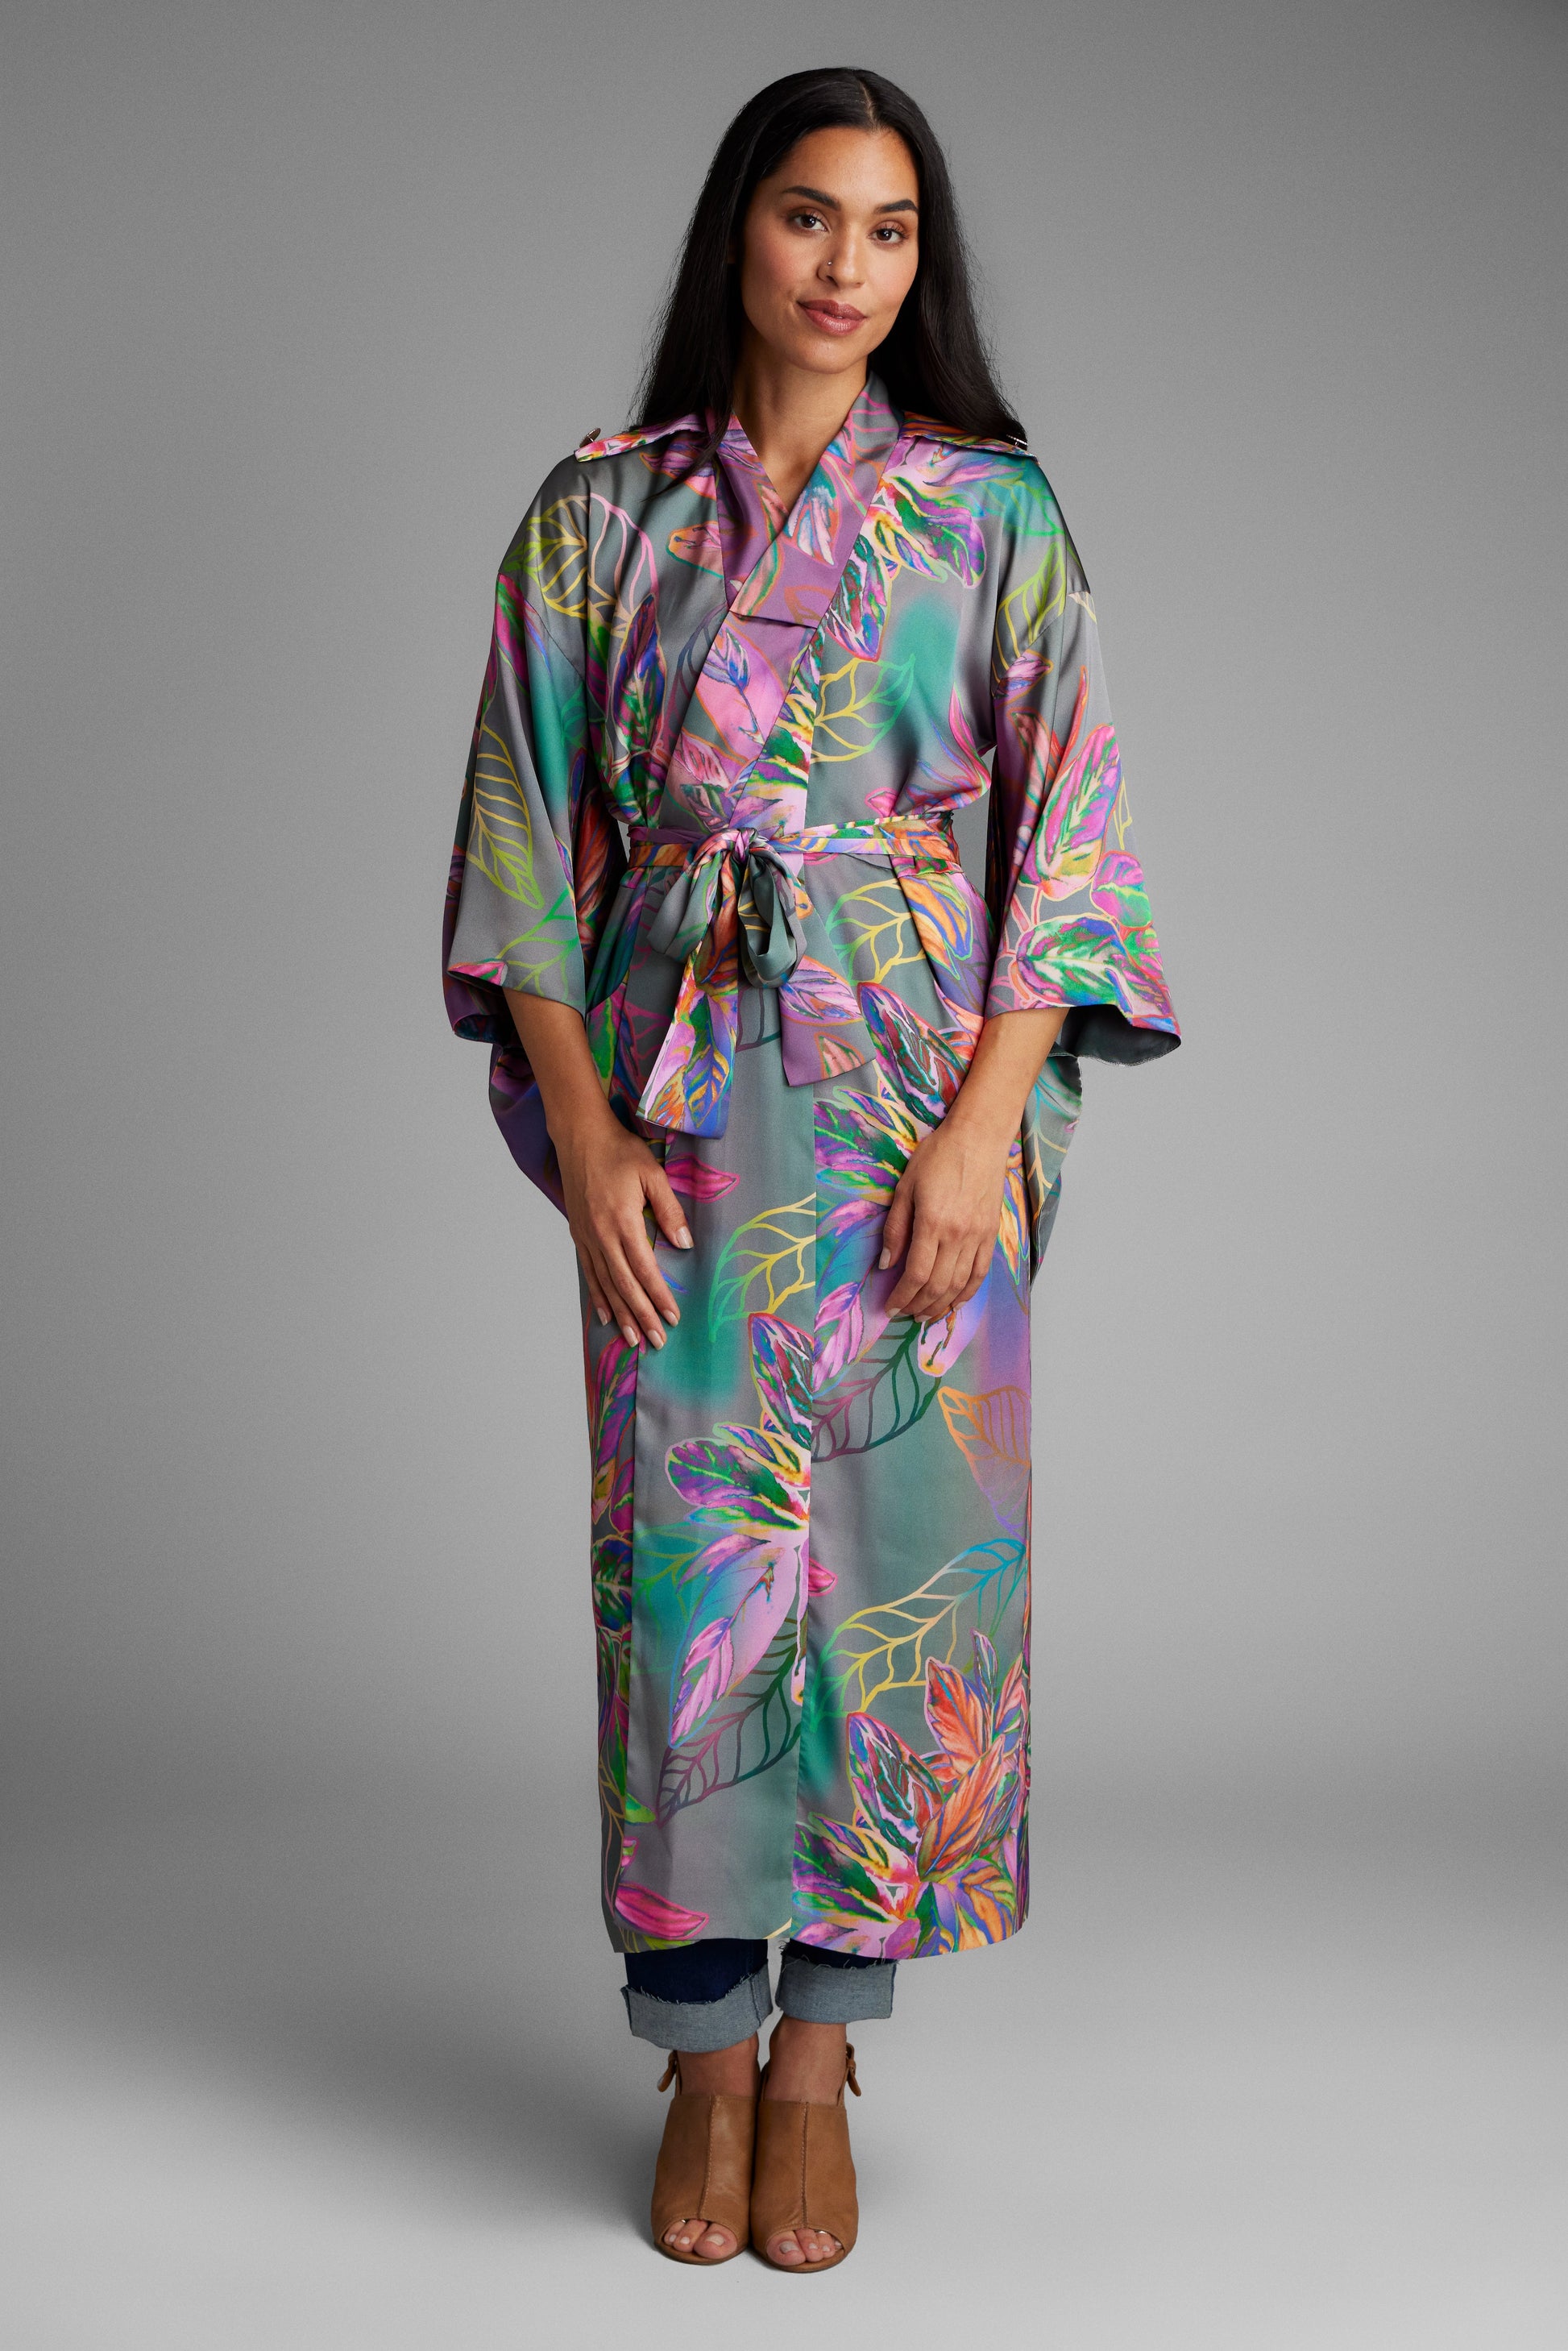 Woman standing wearing an all over tropical printed kimono duster made from recycled materials 3